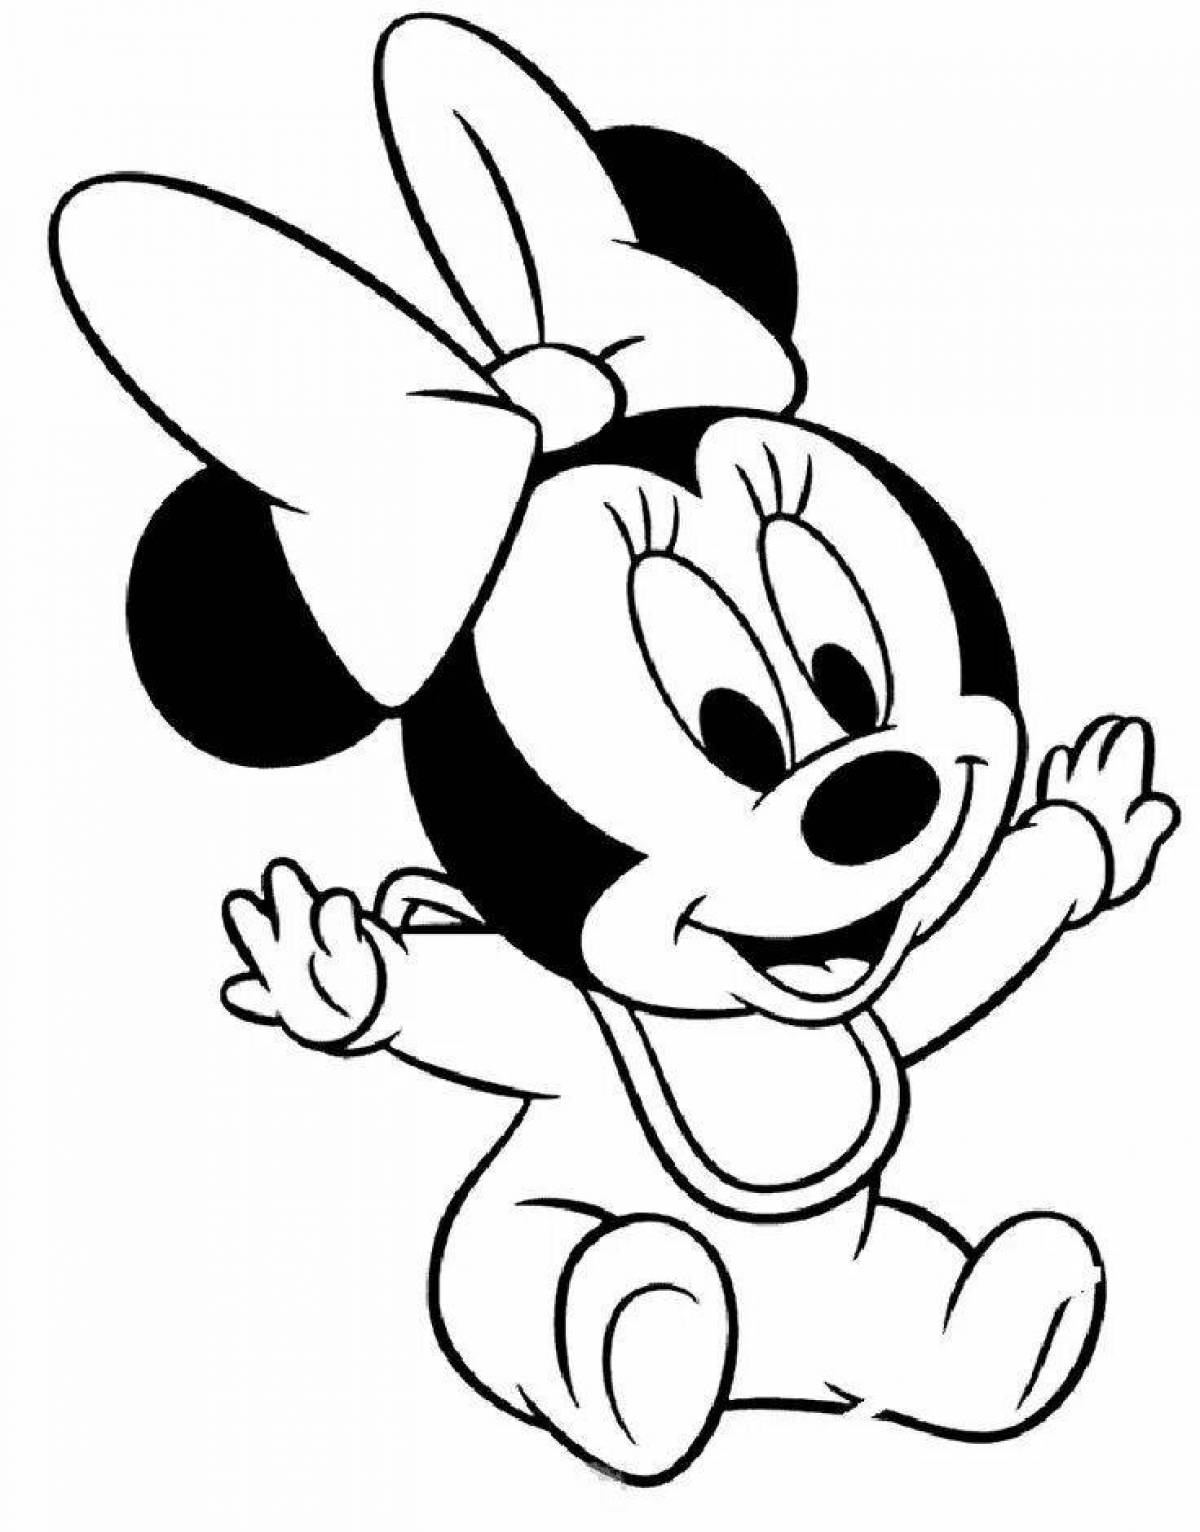 Expressive coloring cartoon mouse